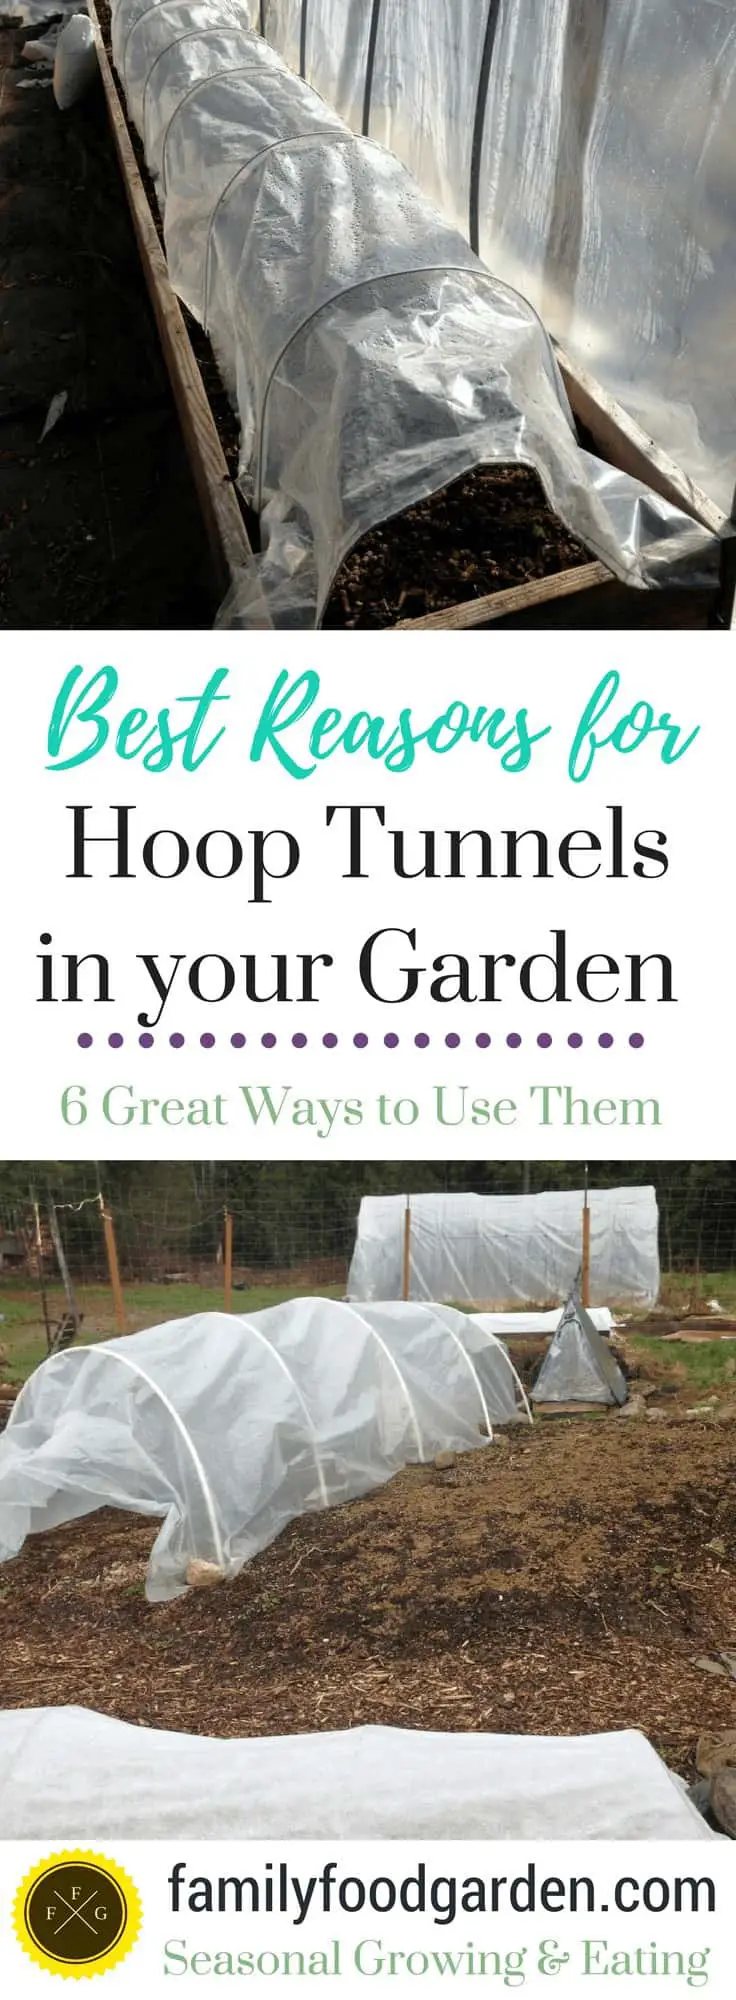 Great reasons to add hoop tunnels into your garden